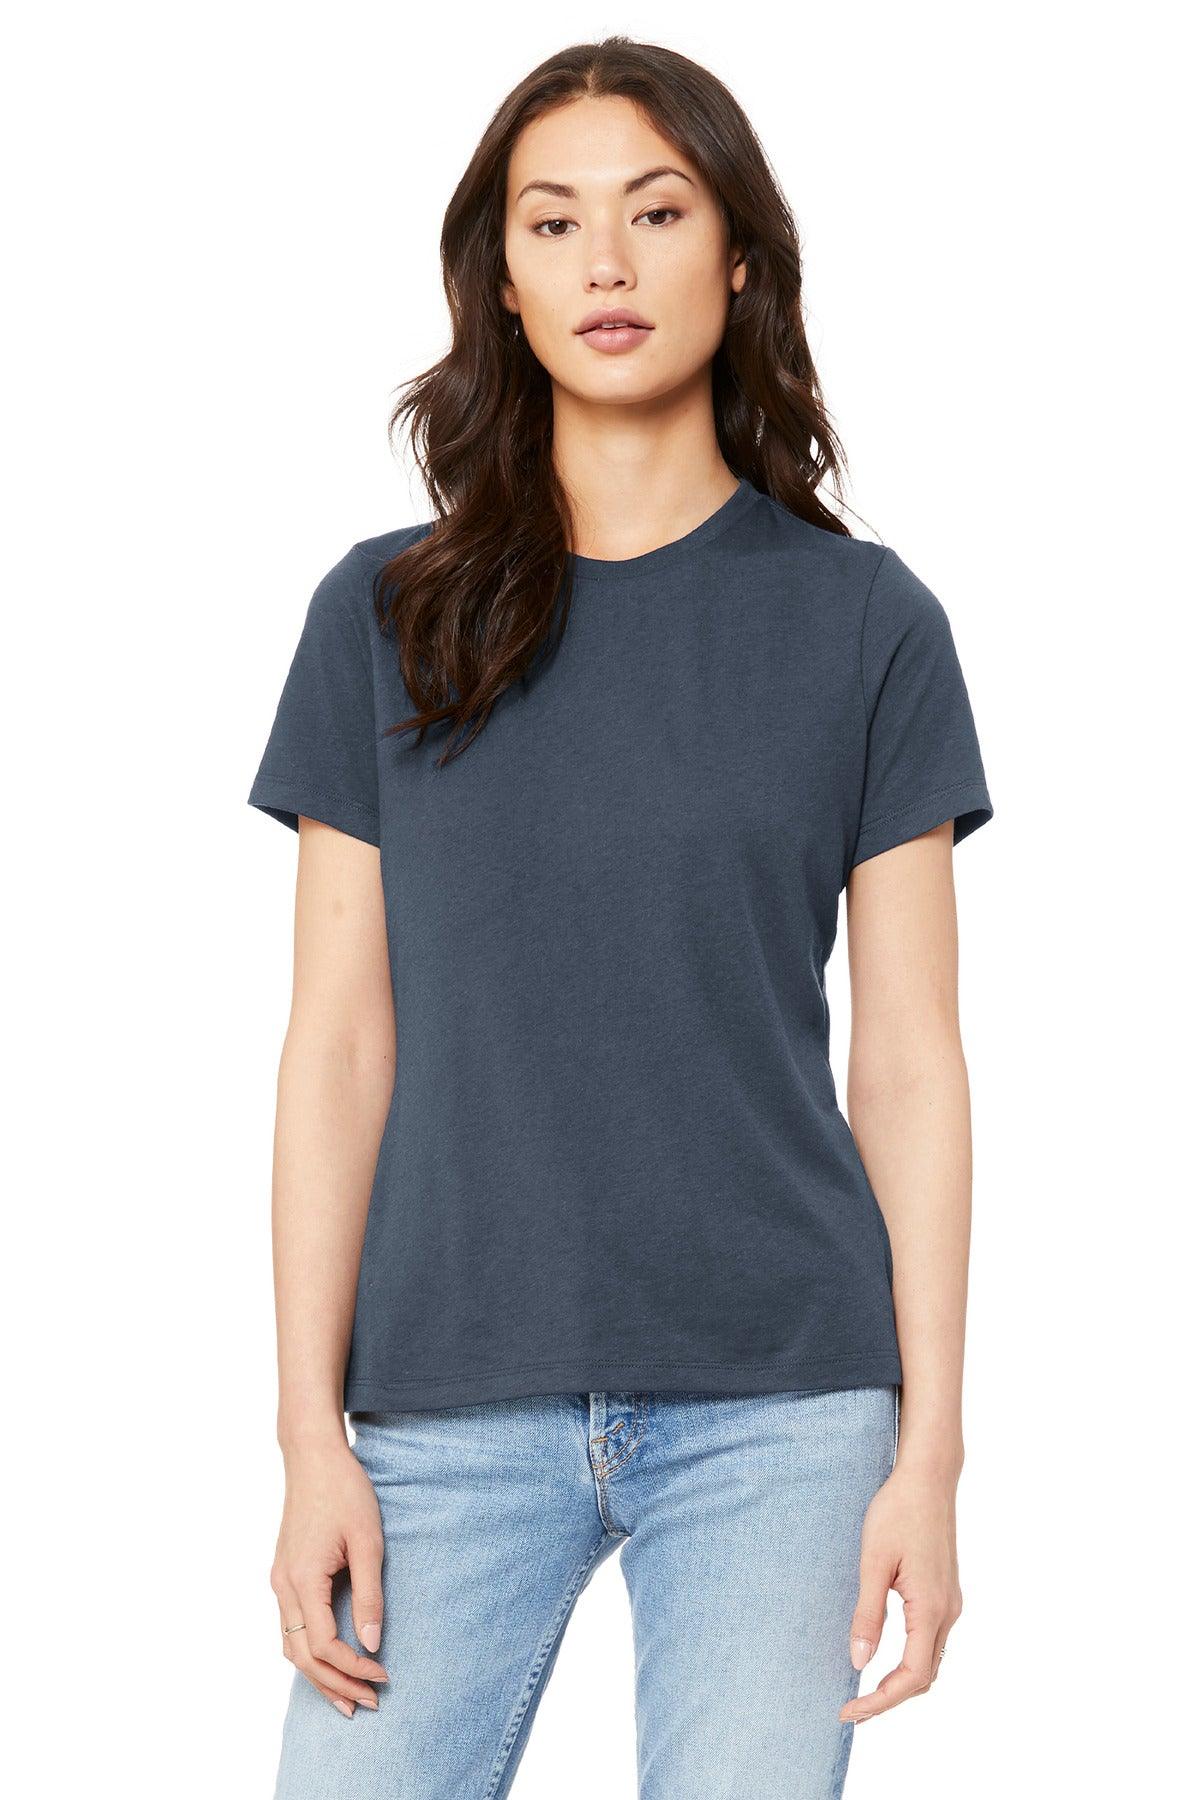 BELLA+CANVAS Women's Relaxed Jersey Short Sleeve Tee. BC6400 - Dresses Max